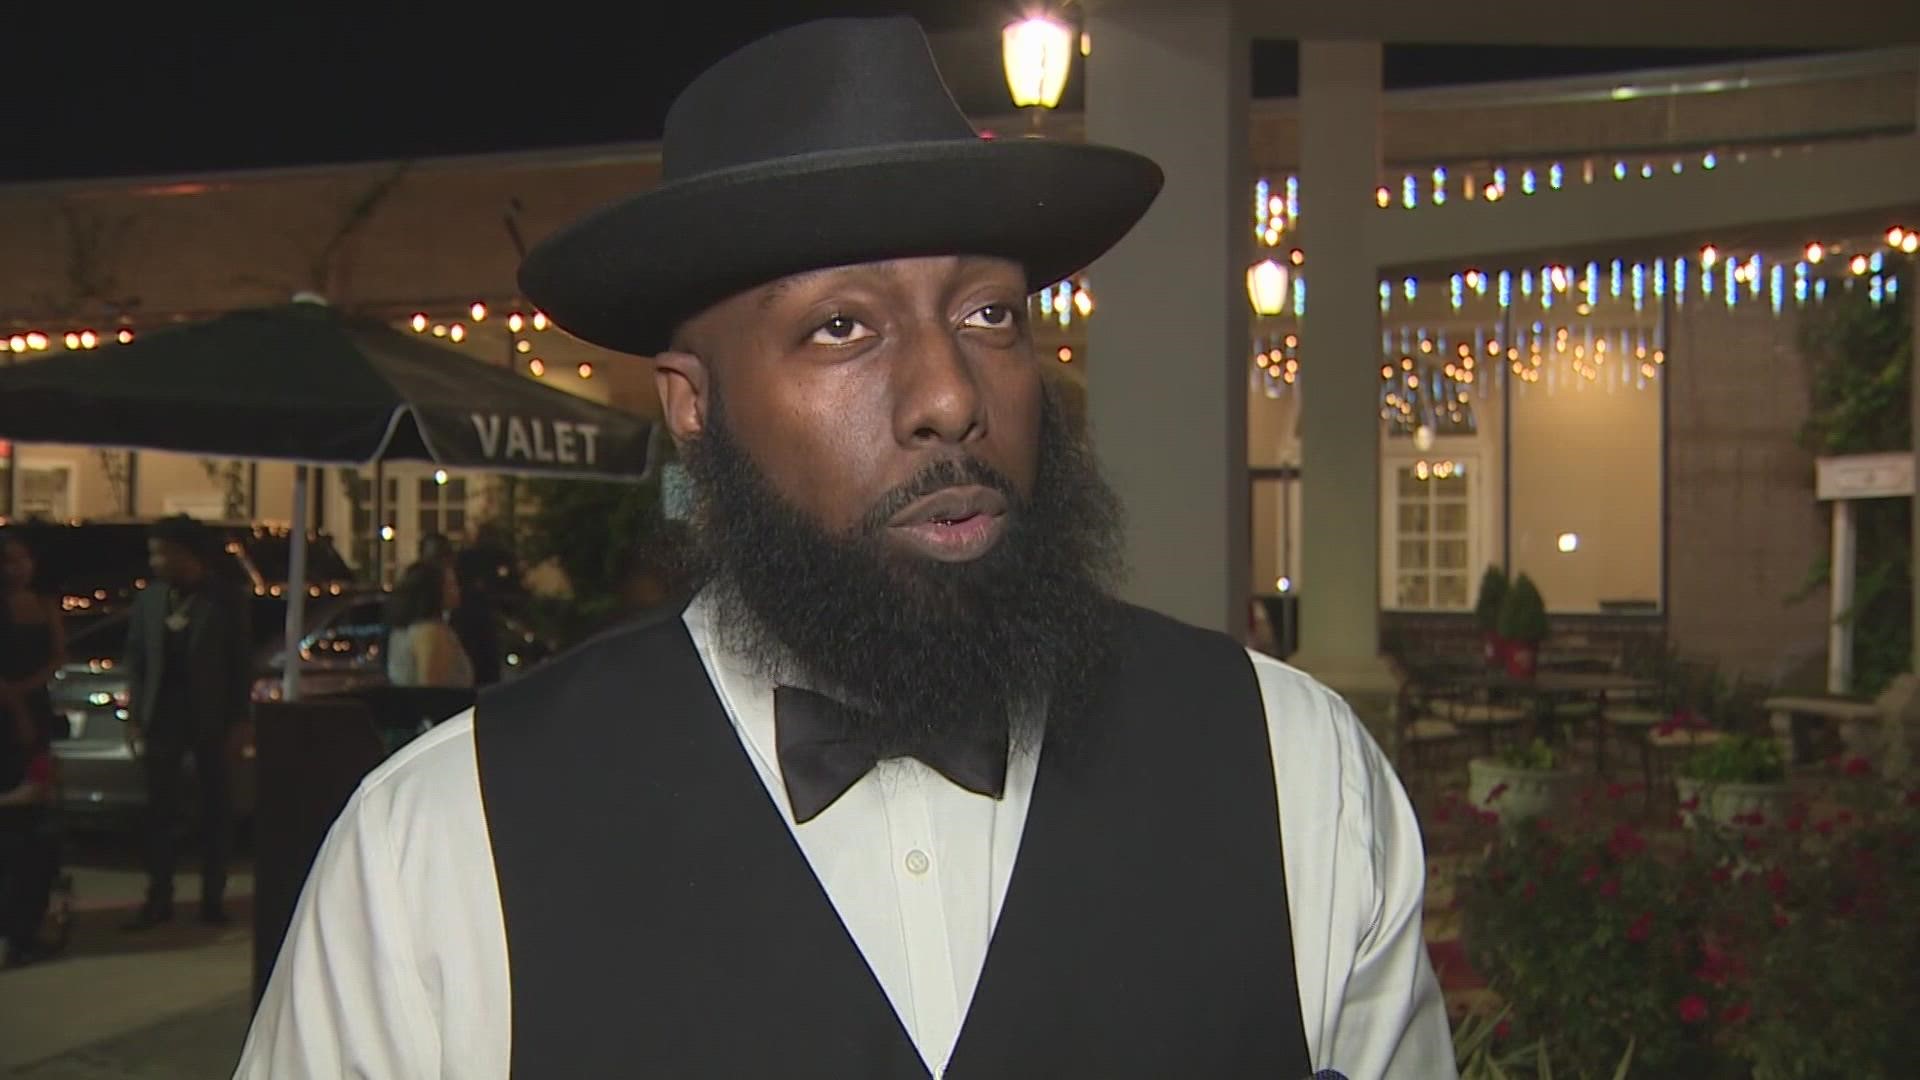 Rapper and philanthropist Trae tha Truth was honored with Joe Biden's Presidential Lifetime Achievement Award in Houston on Friday.